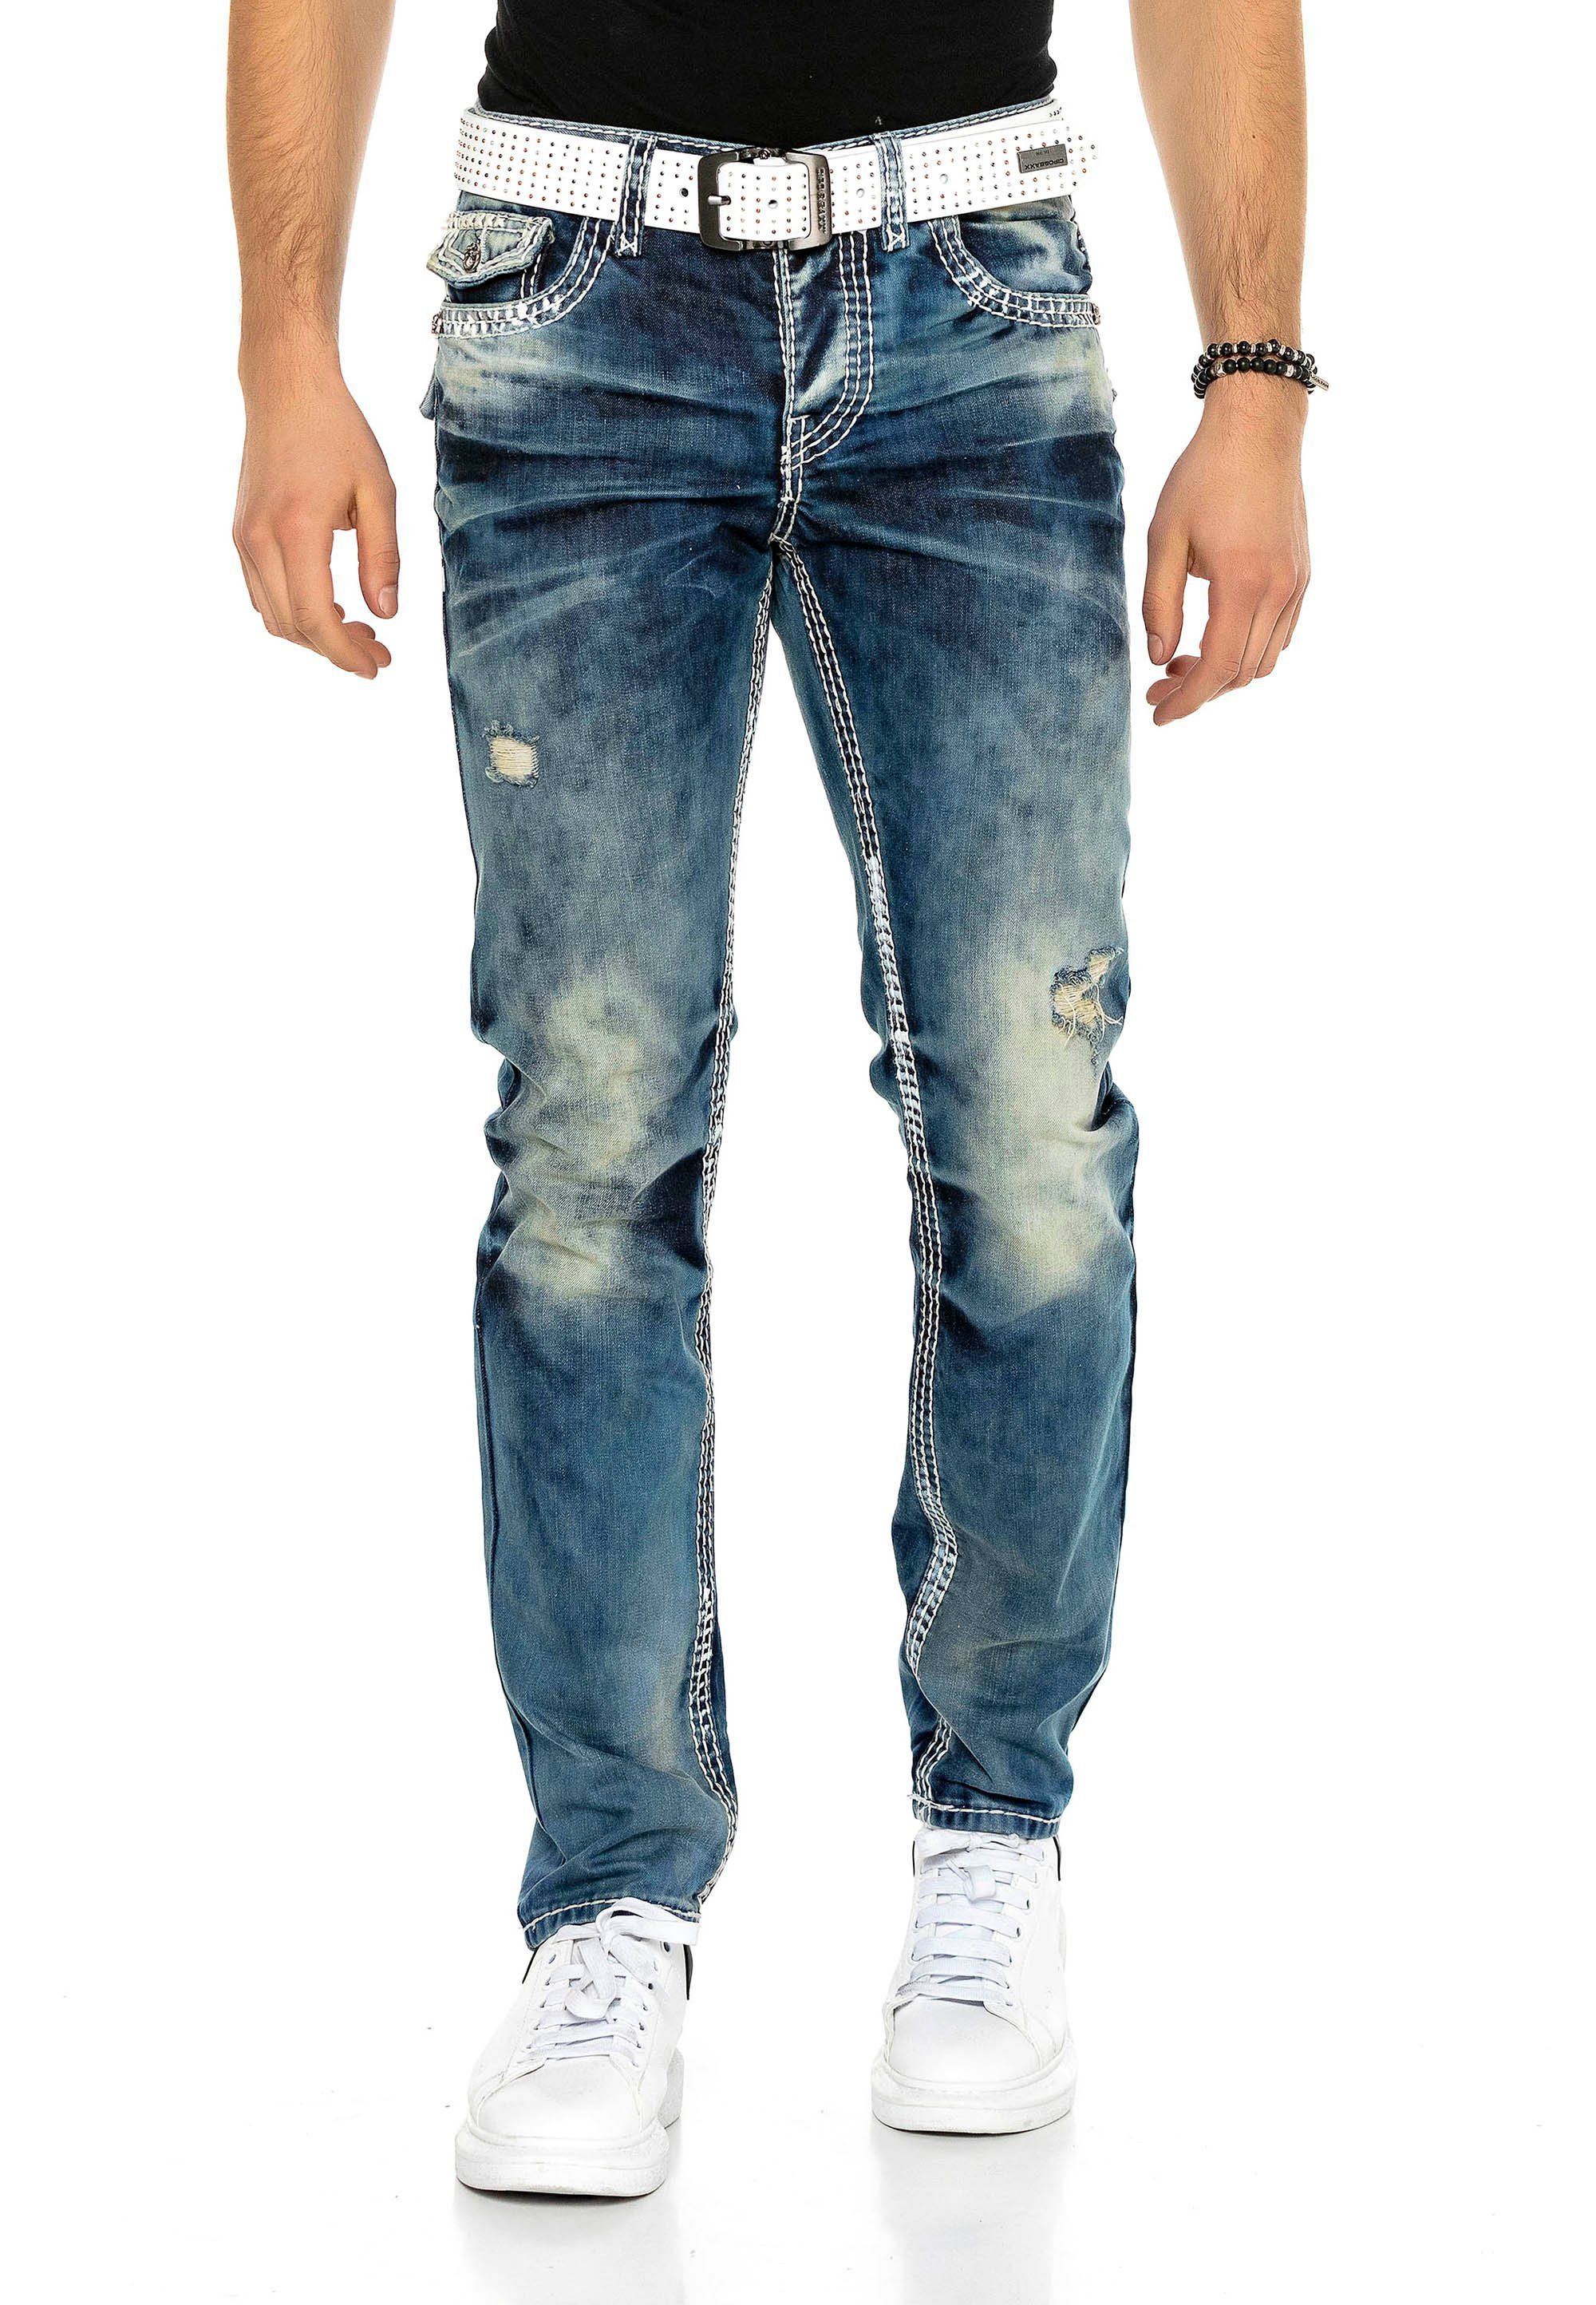 Fit im Used-Look & Straight Jeans Cipo Bequeme coolen Baxx